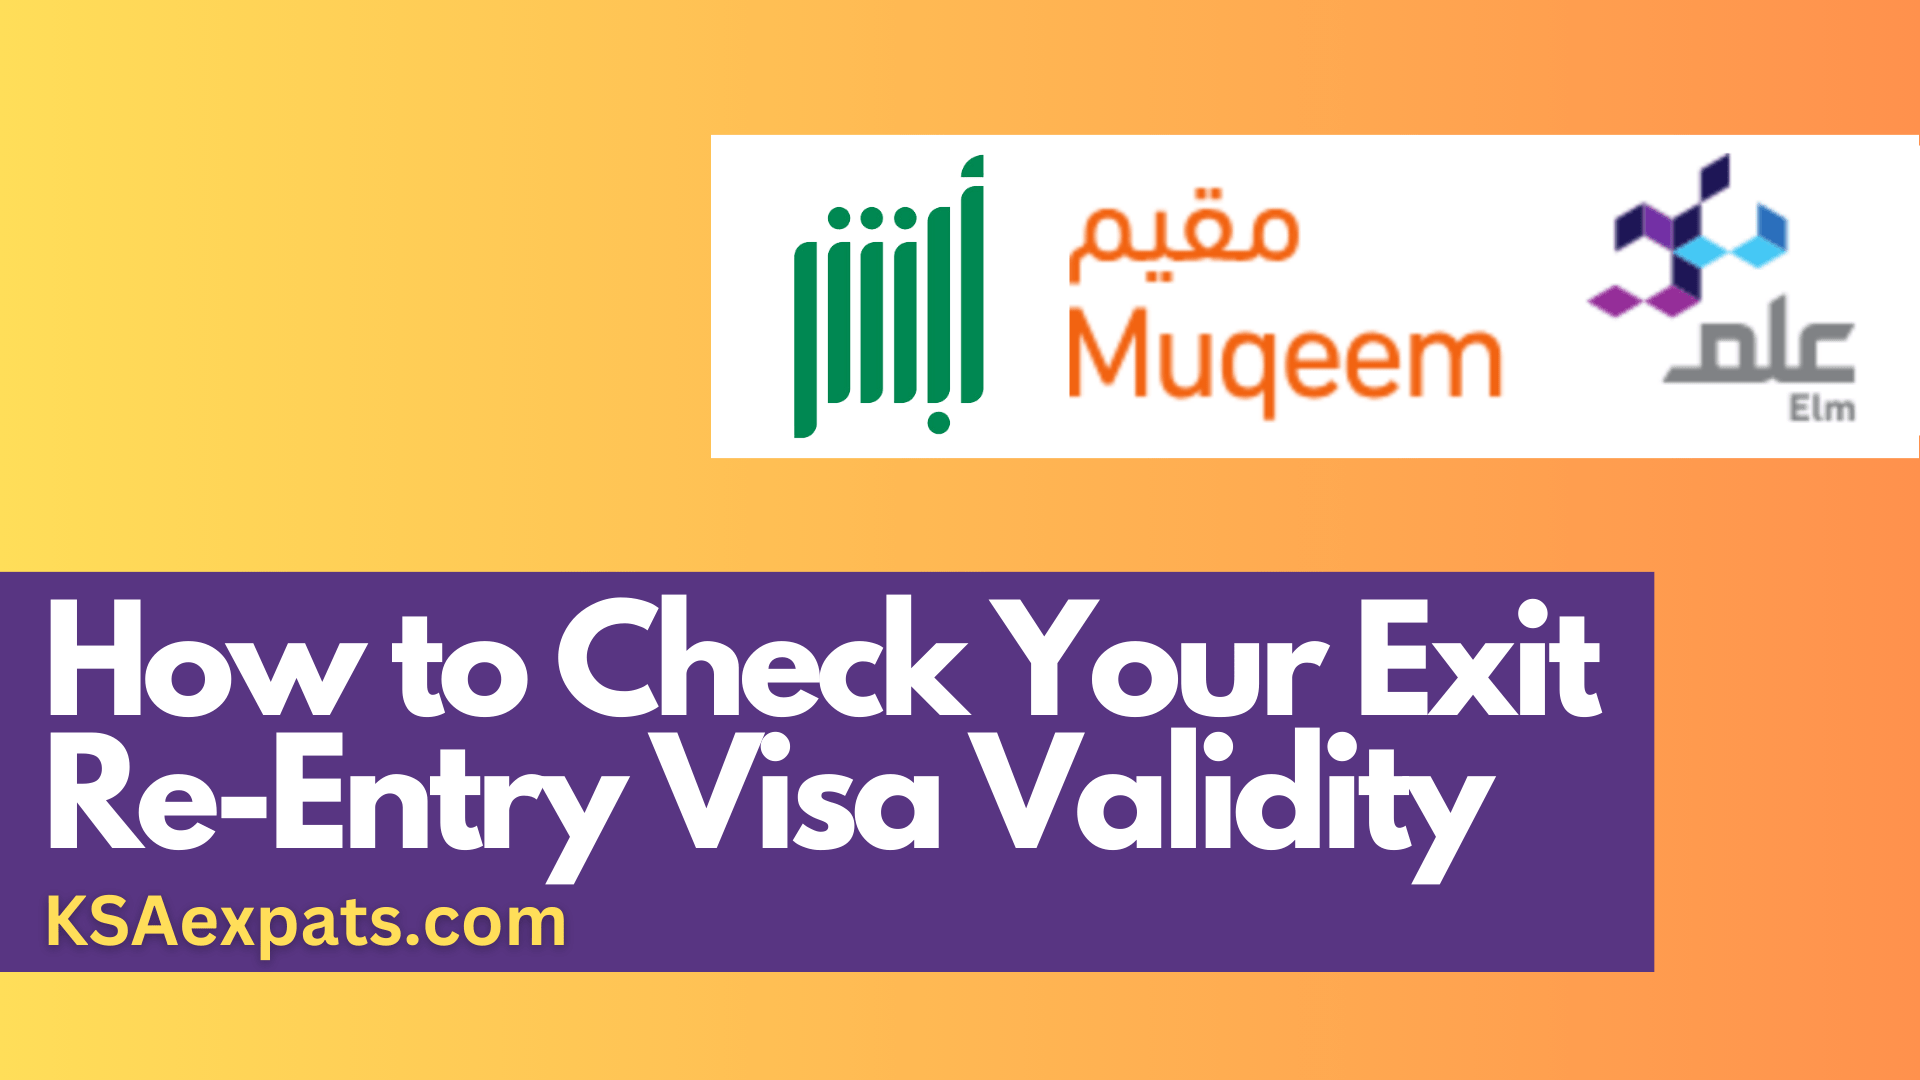 How to Check Your Exit Re-Entry Visa Validity